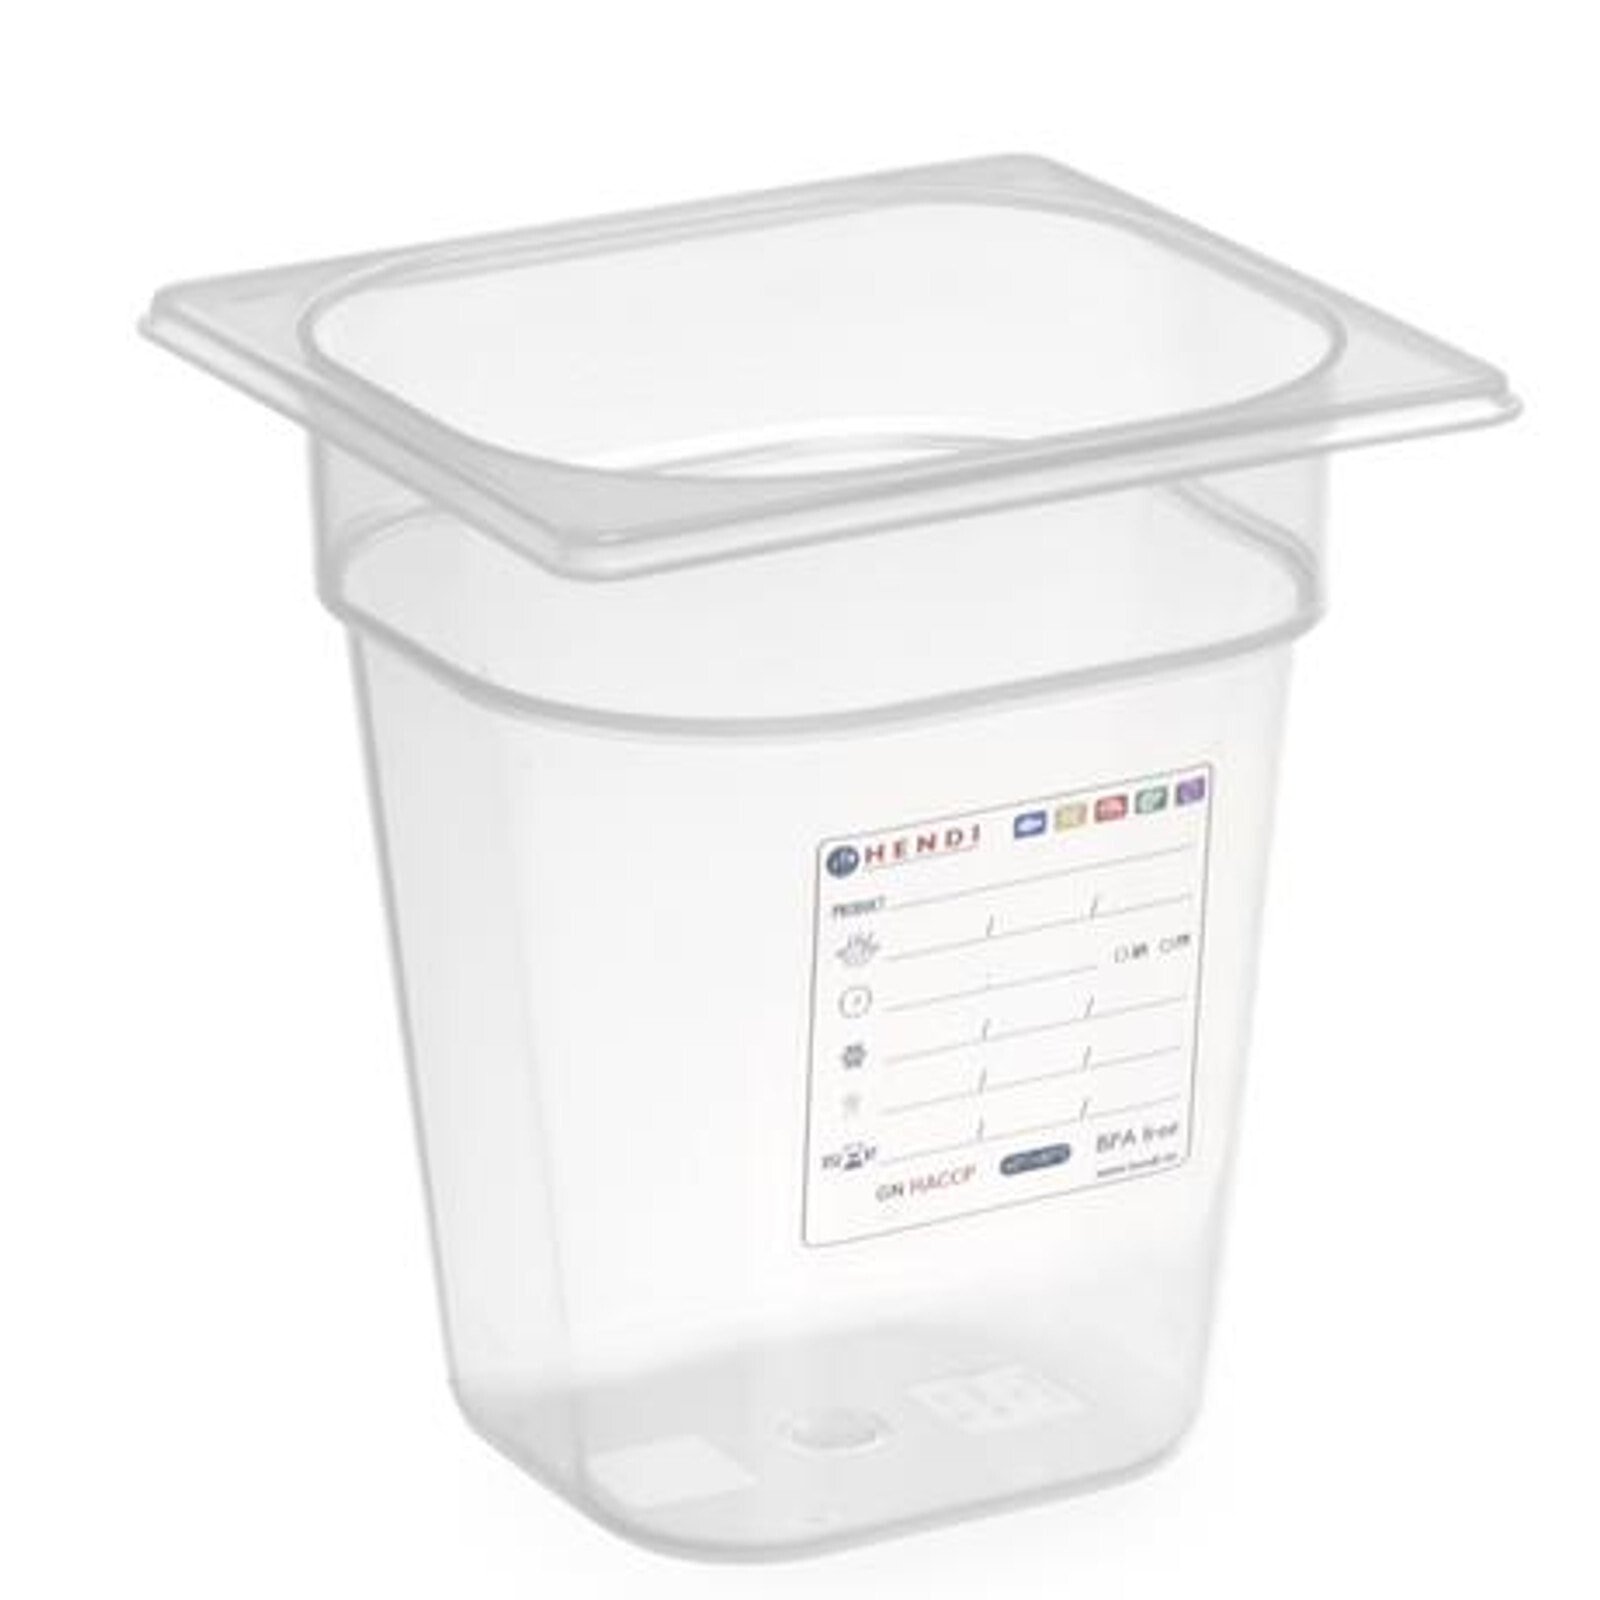 Container made of polypropylene GN 1/6, height 65 mm - Hendi 880487